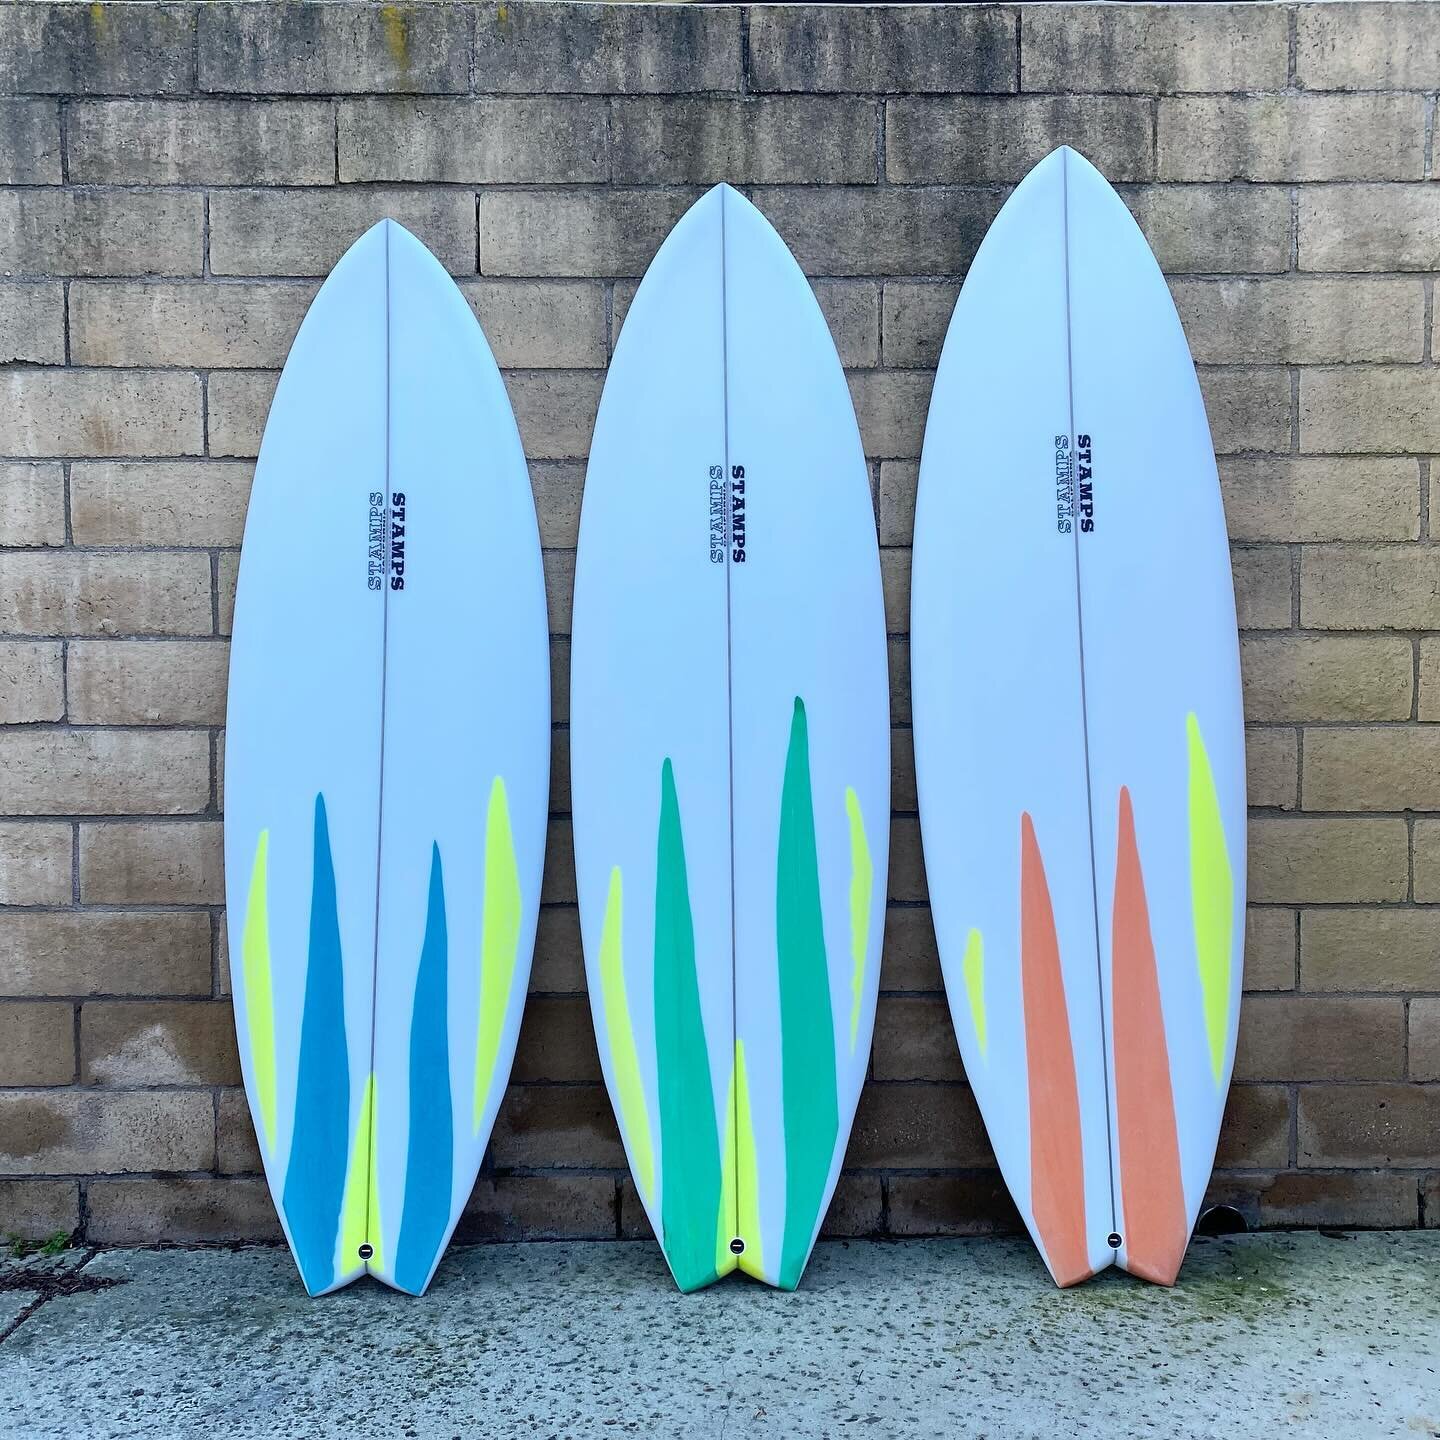 :: just dropped a few for the racks and a custom @katin_surfshop :: RustlerV2 model at 5&rsquo;7&rdquo;, 5&rsquo;9&rdquo;, 5&rsquo;11&rdquo; :: TKF at 5&rsquo;5&rdquo;, 5&rsquo;7&rdquo;, 5&rsquo;9&rdquo; :: Katin Kustom order BlindSpot 6&rsquo;3&rdqu